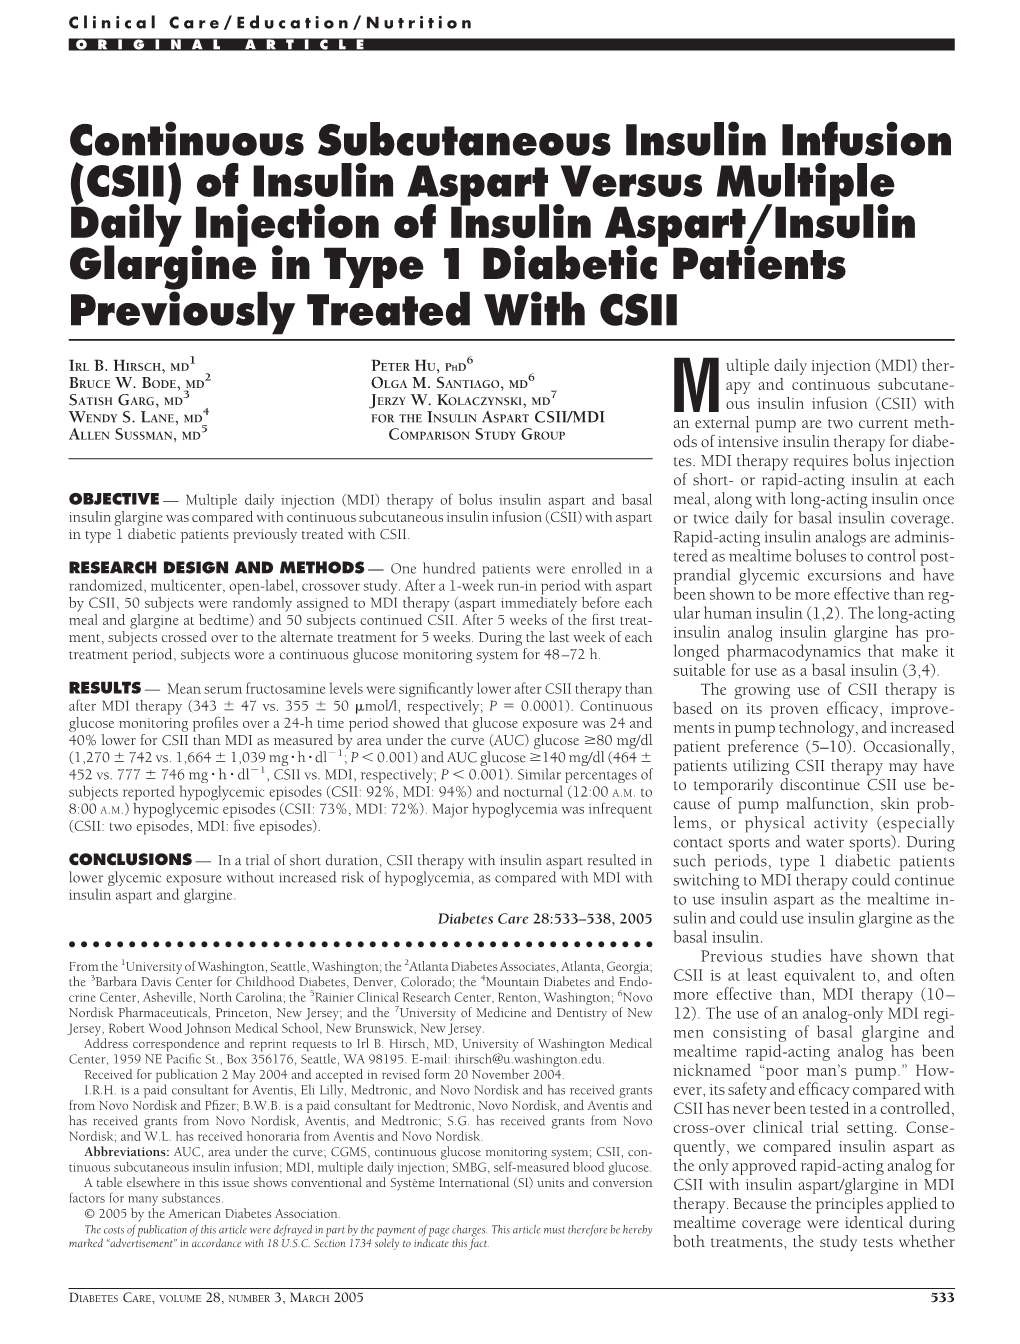 Continuous Subcutaneous Insulin Infusion